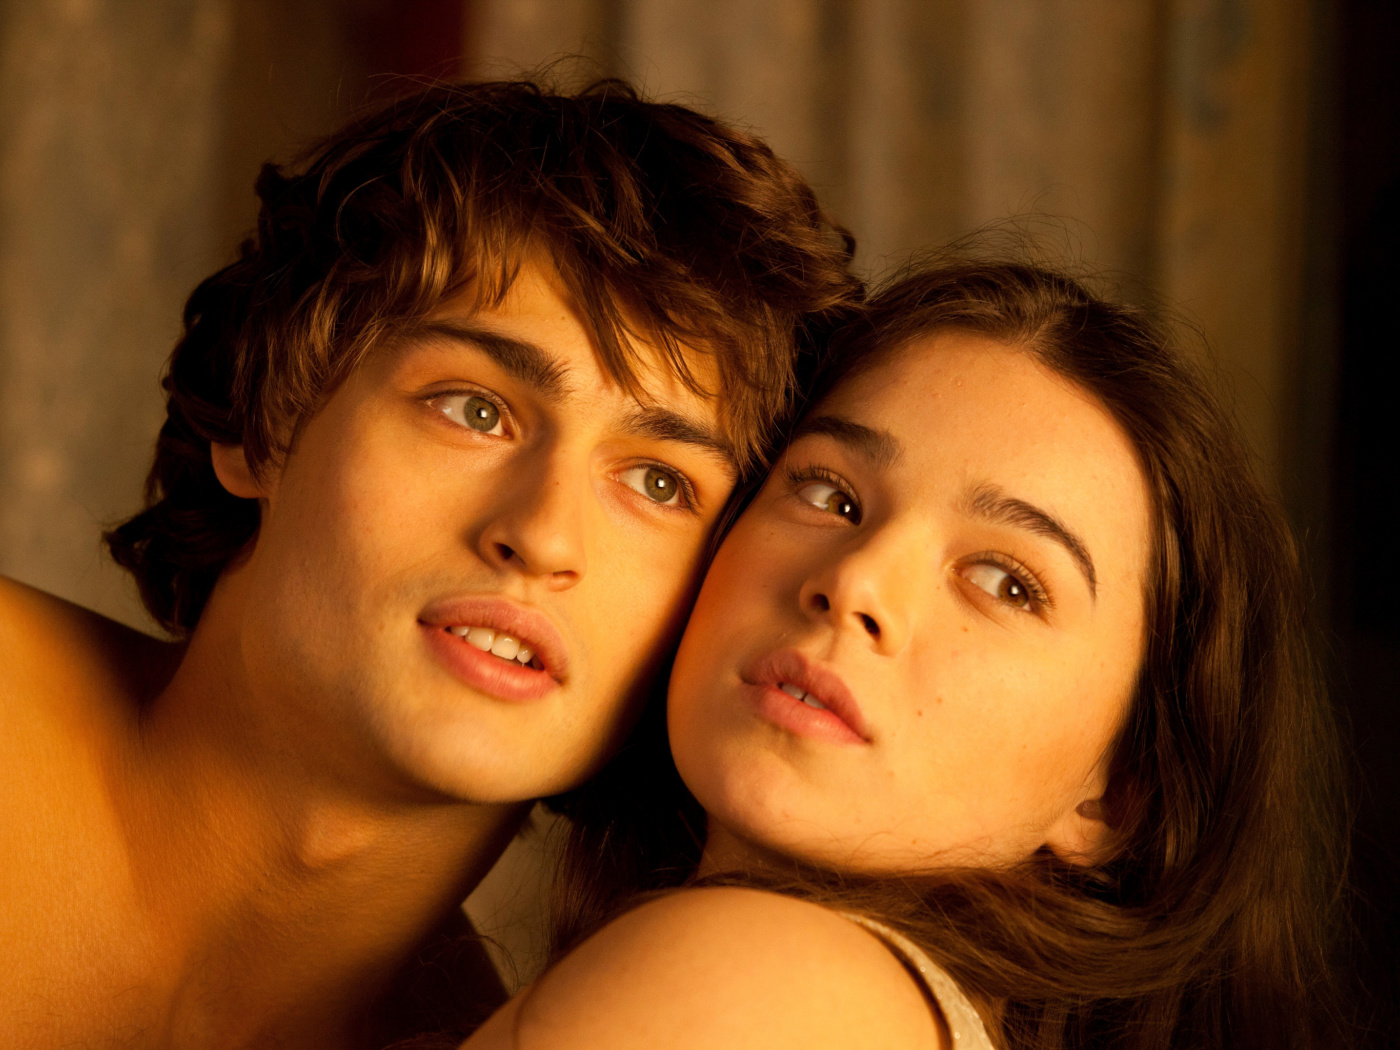 Das Romeo and Juliet with Hailee Steinfeld and Douglas Booth Wallpaper 1400x1050